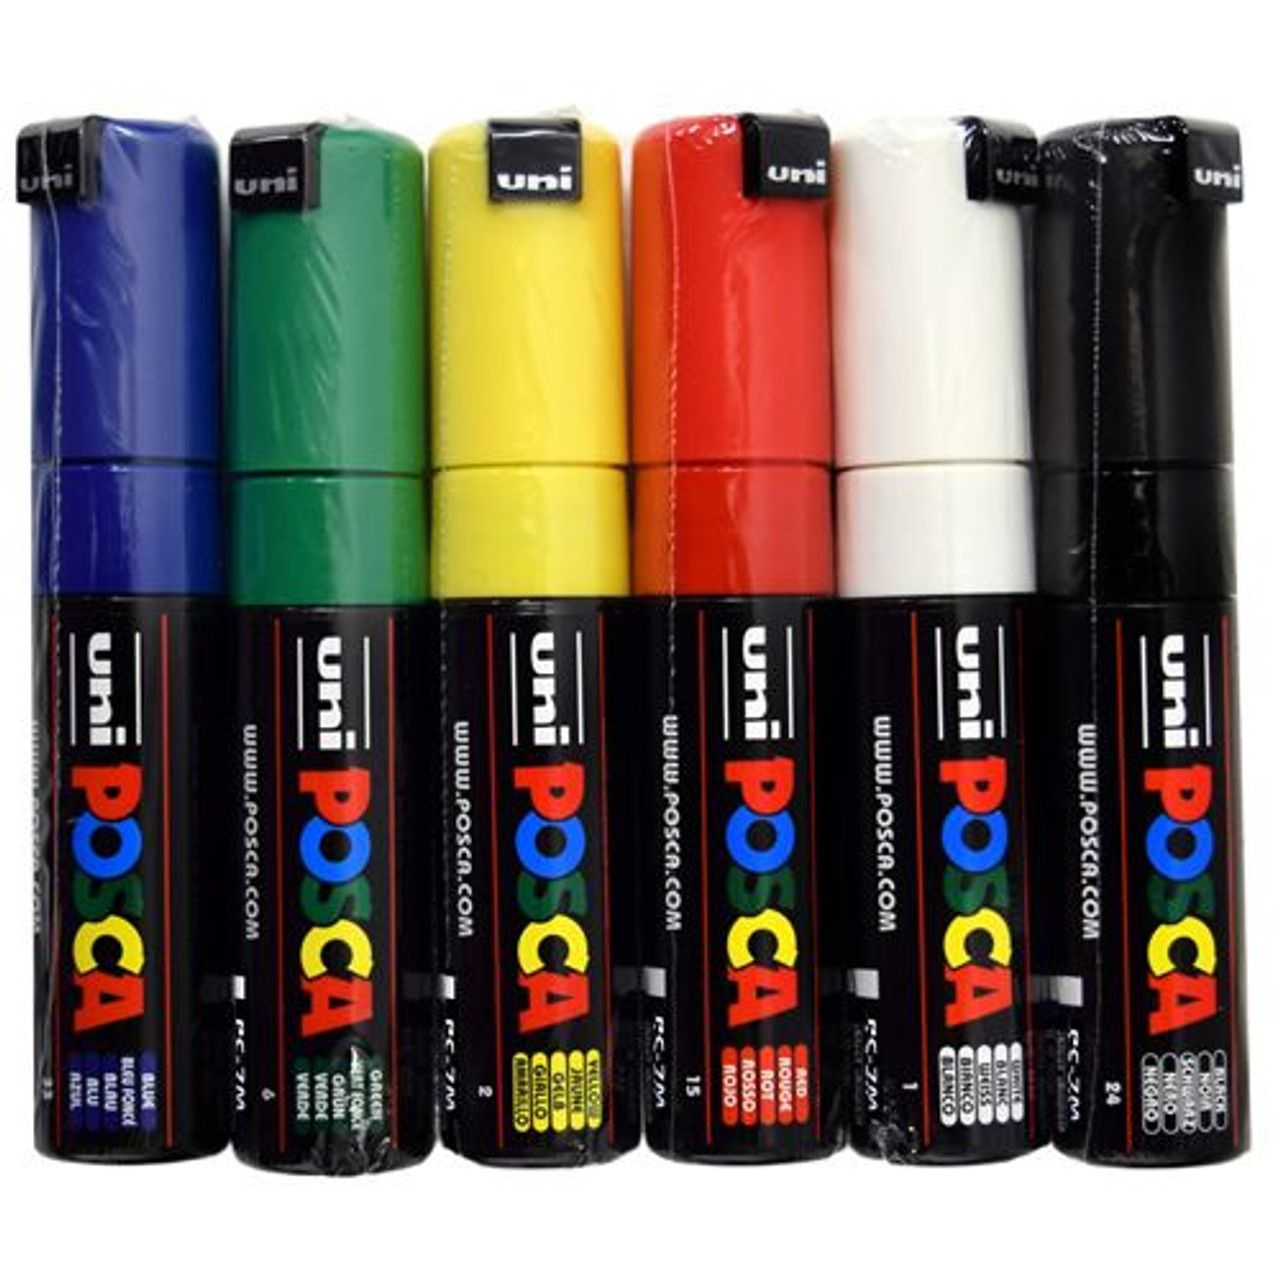 POSCA | PC-7M Art Paint Marker Pens | Large Bullet Tip | Drawing Drafting  Poster Coloring Markers | Black | Metal Glass Terracotta Fabric